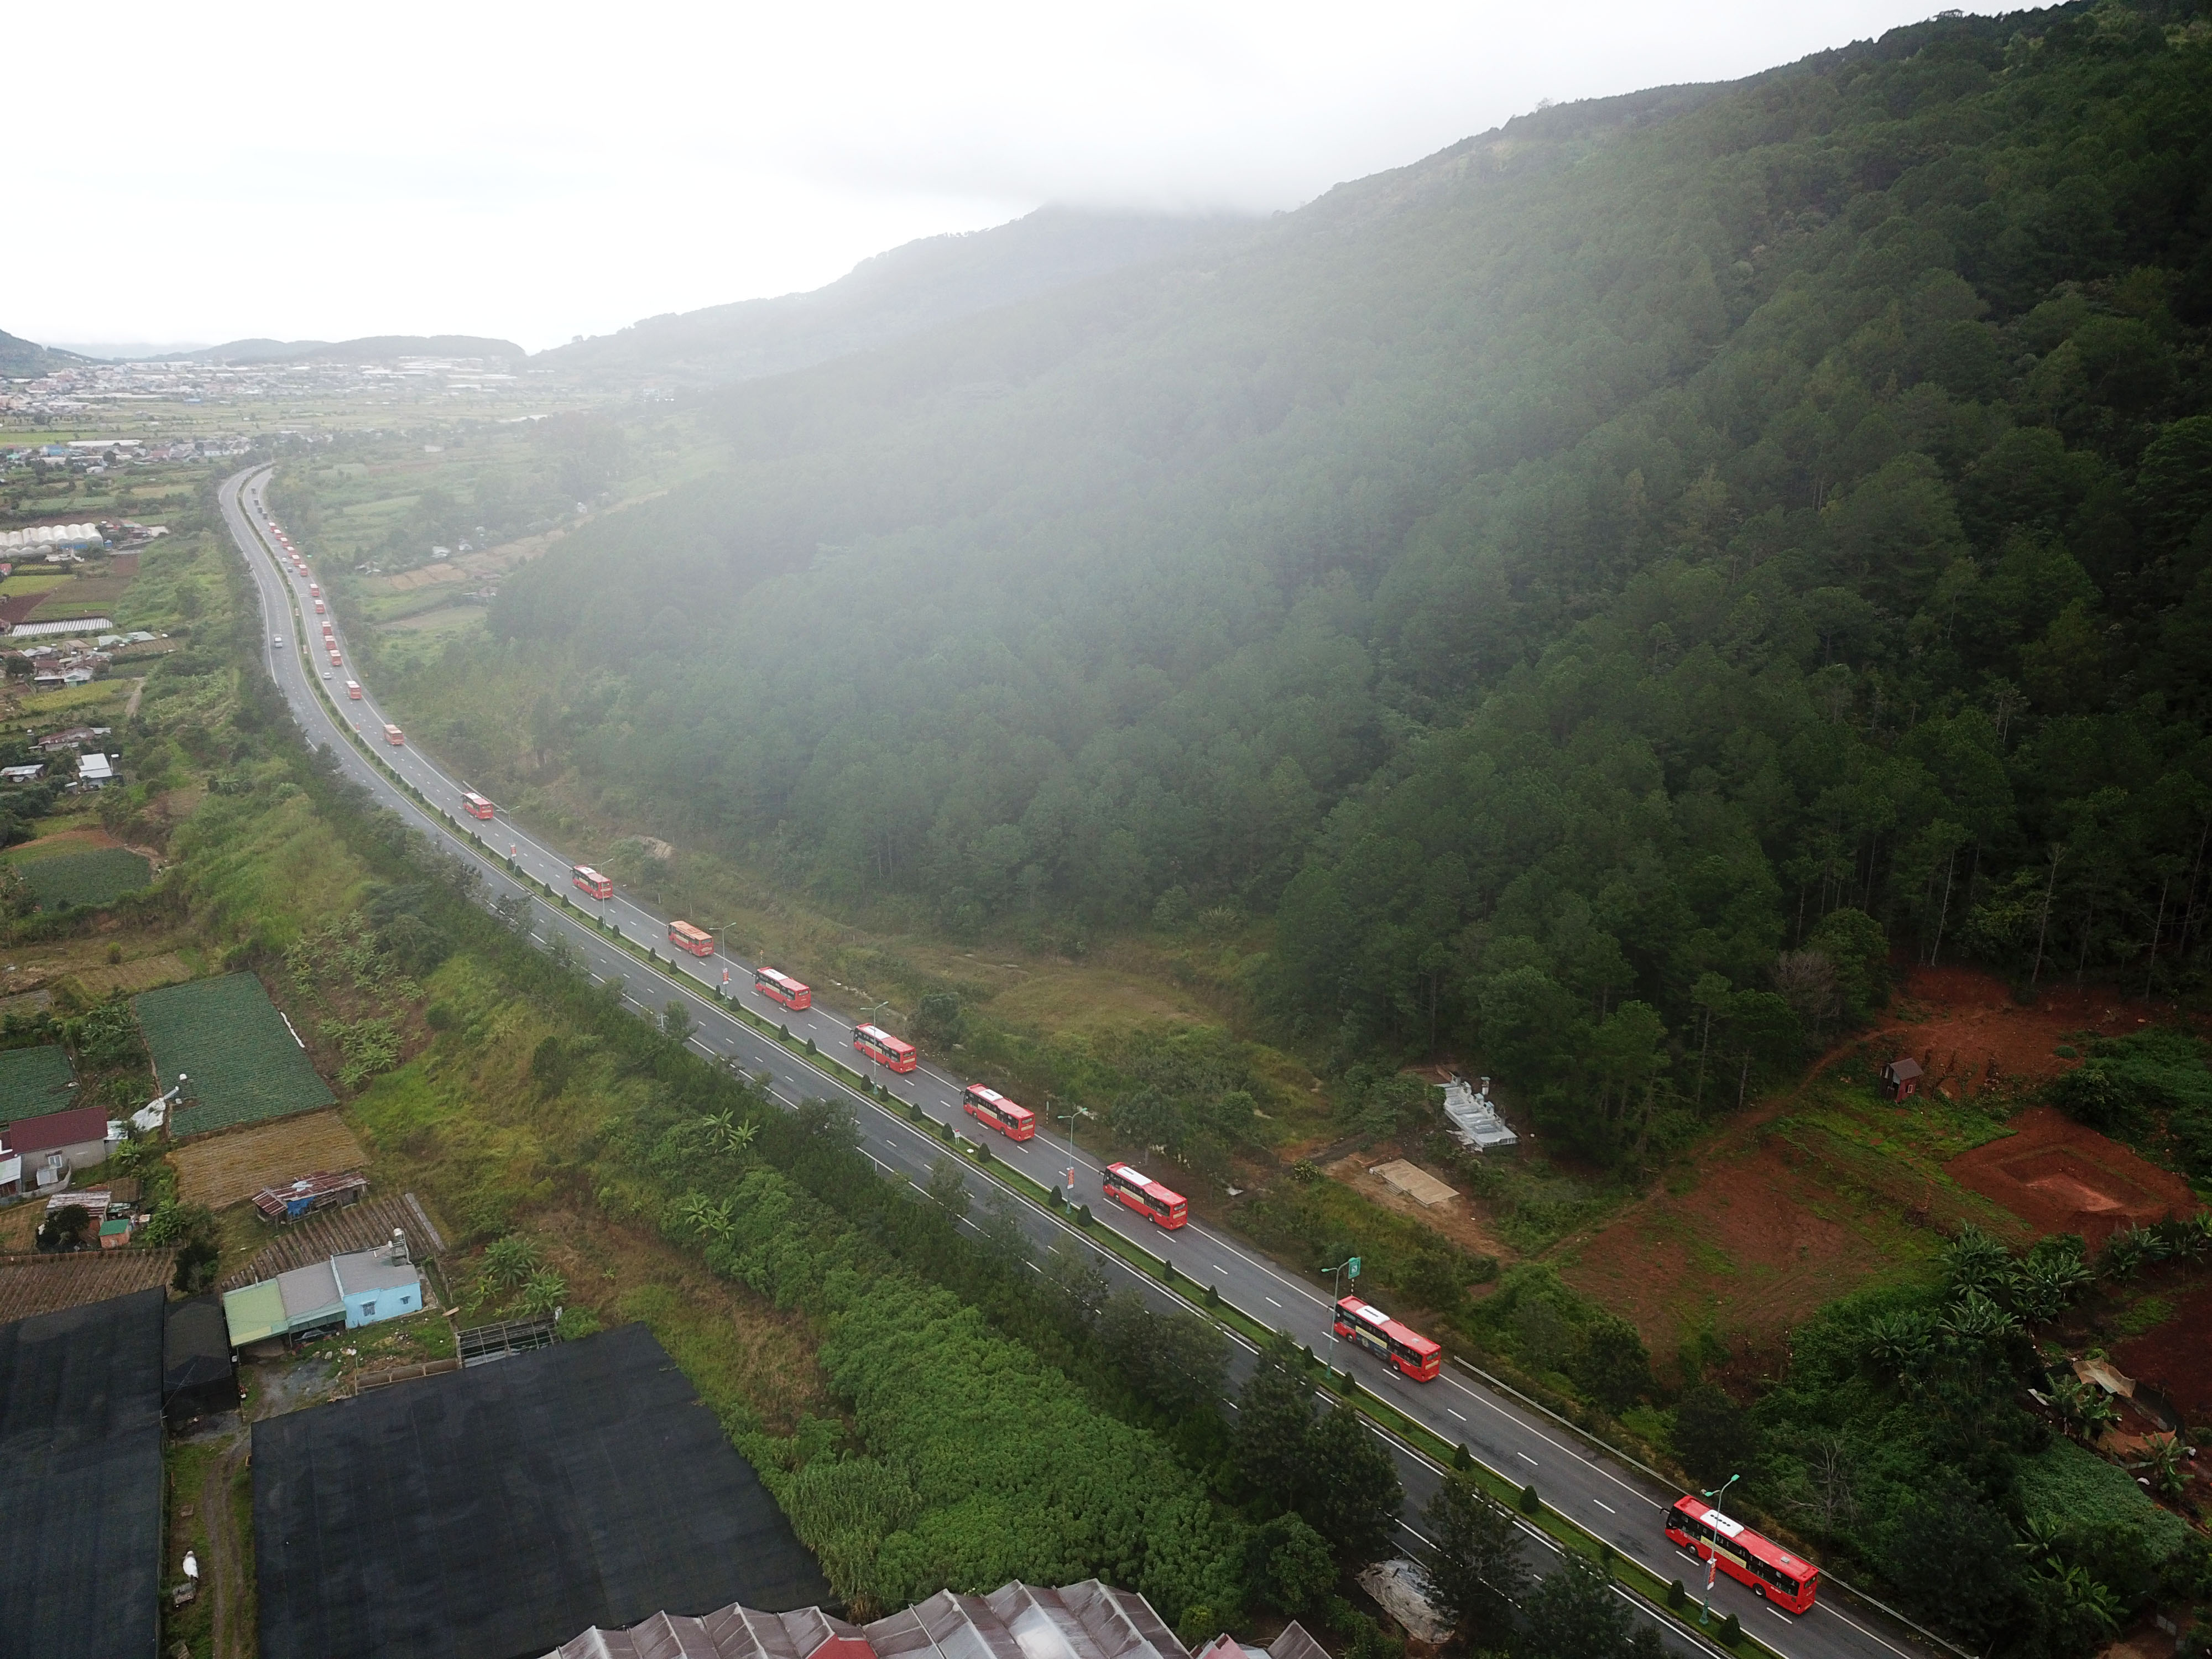 An aerial view of the Lien Khuong - Prenn Expressway in Lam Dong Province. Photo: Duc Tho / Tuoi Tre